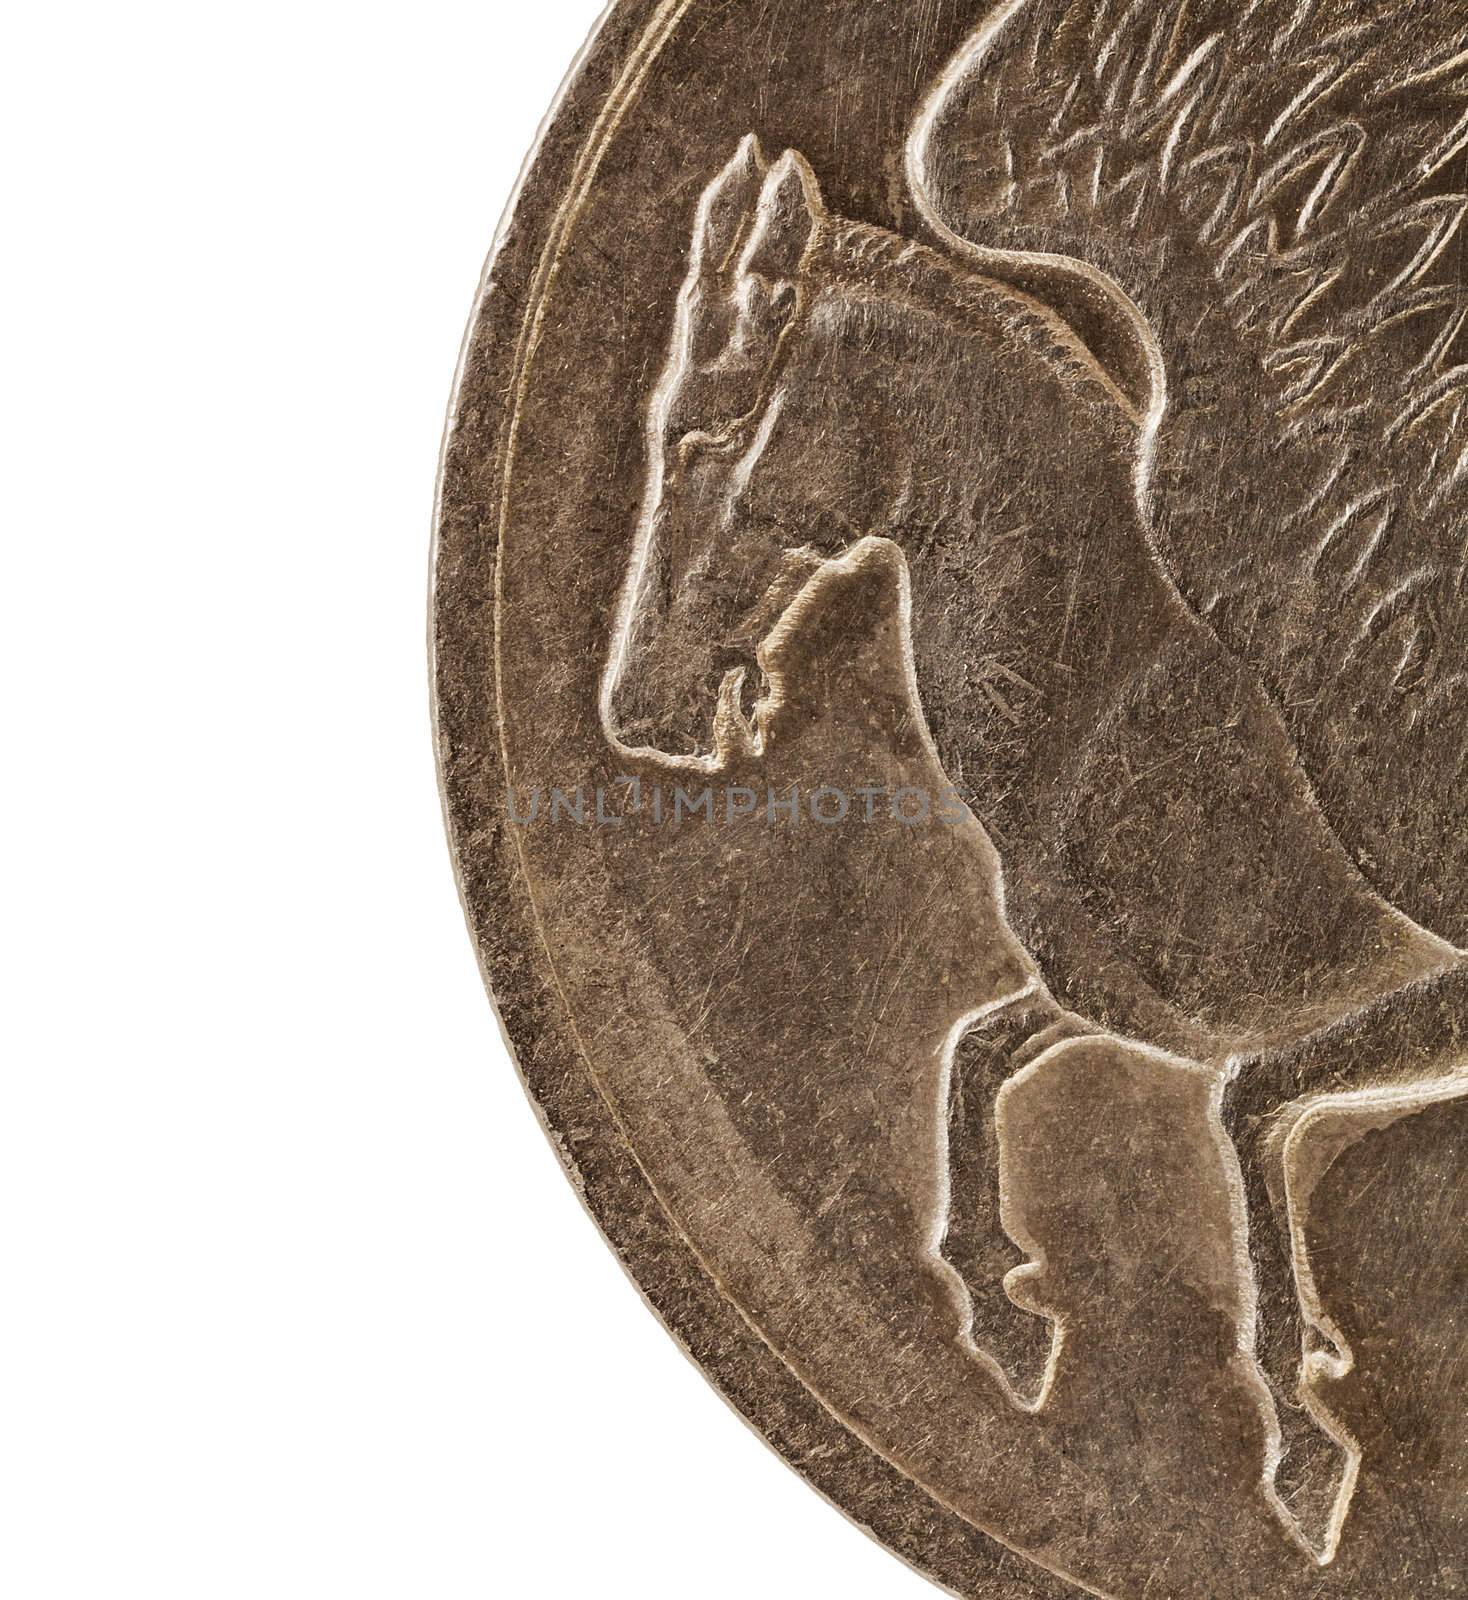 Pegasus, winged horse from Greek mythology, a detail (2 times life-size)  from ten drachmas old circulated coin (1973)